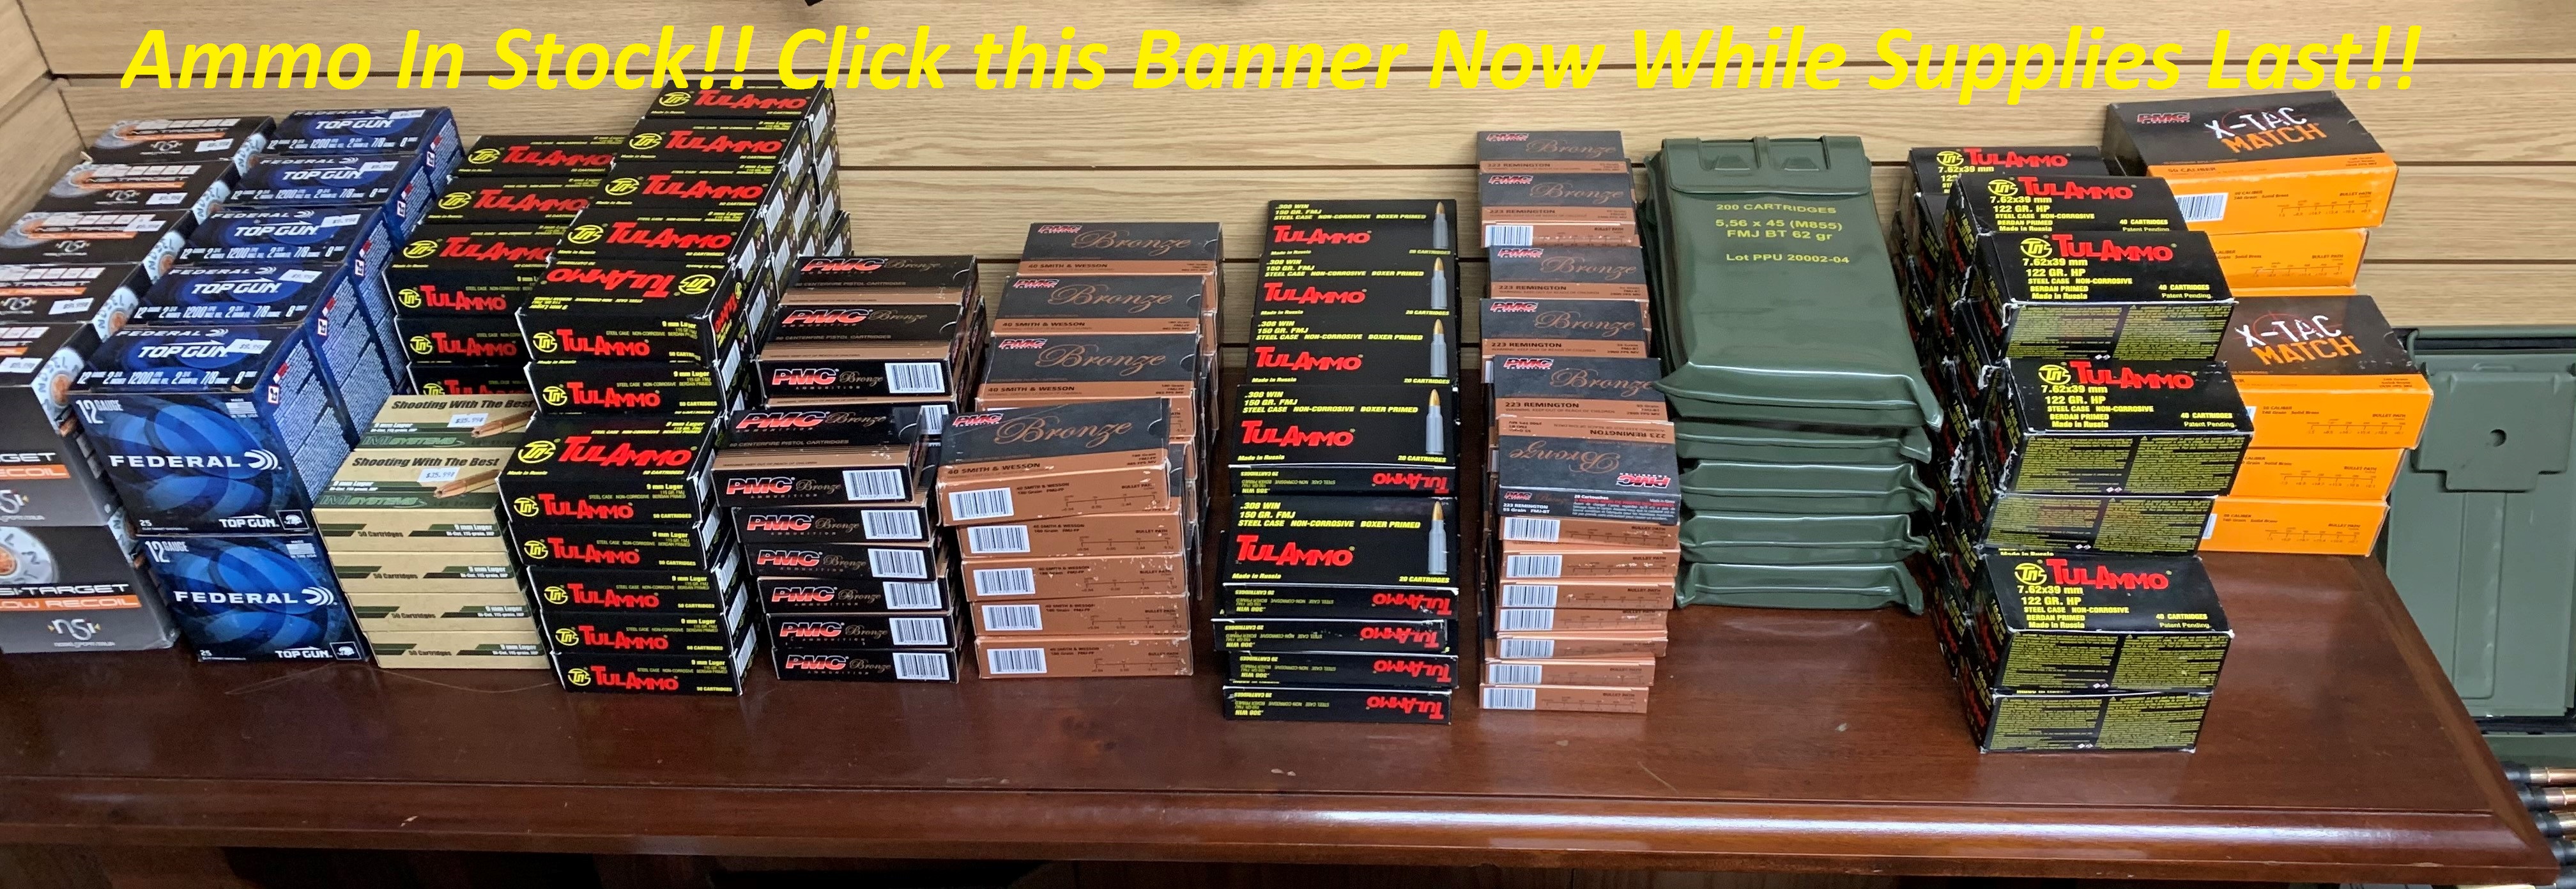 https://www.swamplandtrading.com/catalog/ammo?select_out_of_stock=&local=true&page=1